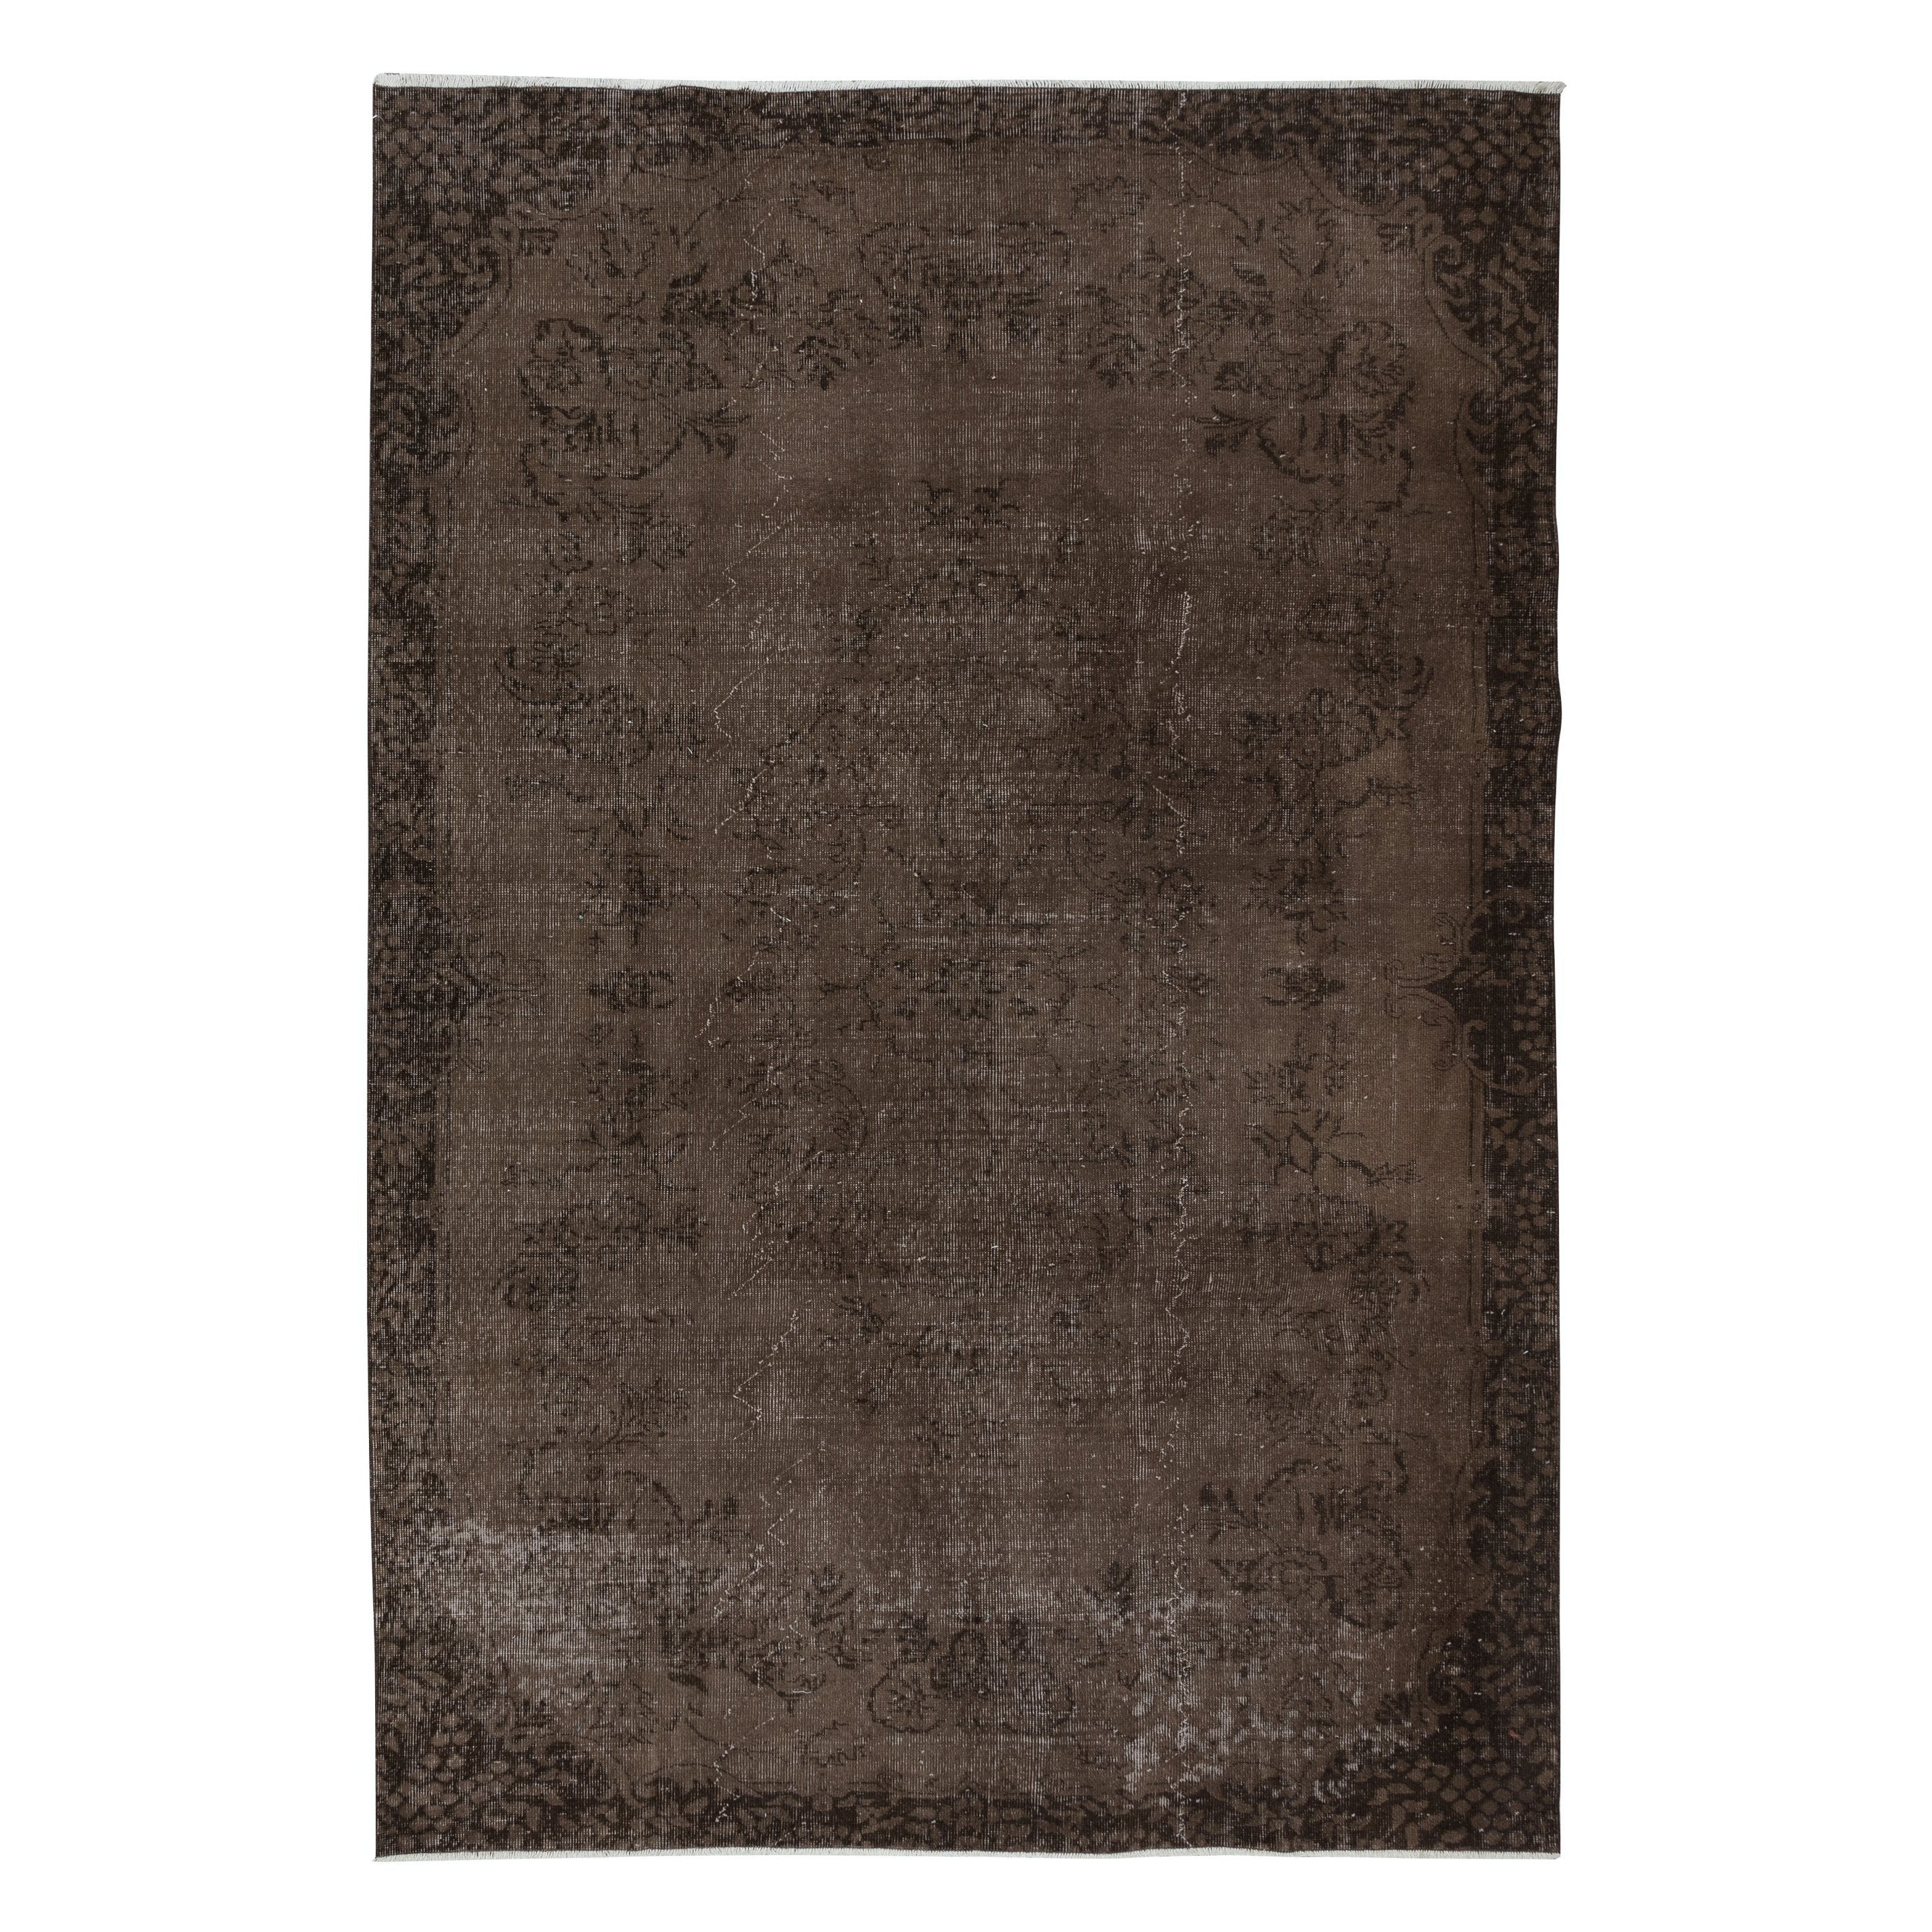 6.6x9.7 Ft Home Decor Handmade Turkish Rug in Brown, Rustic Contemporary Carpet For Sale